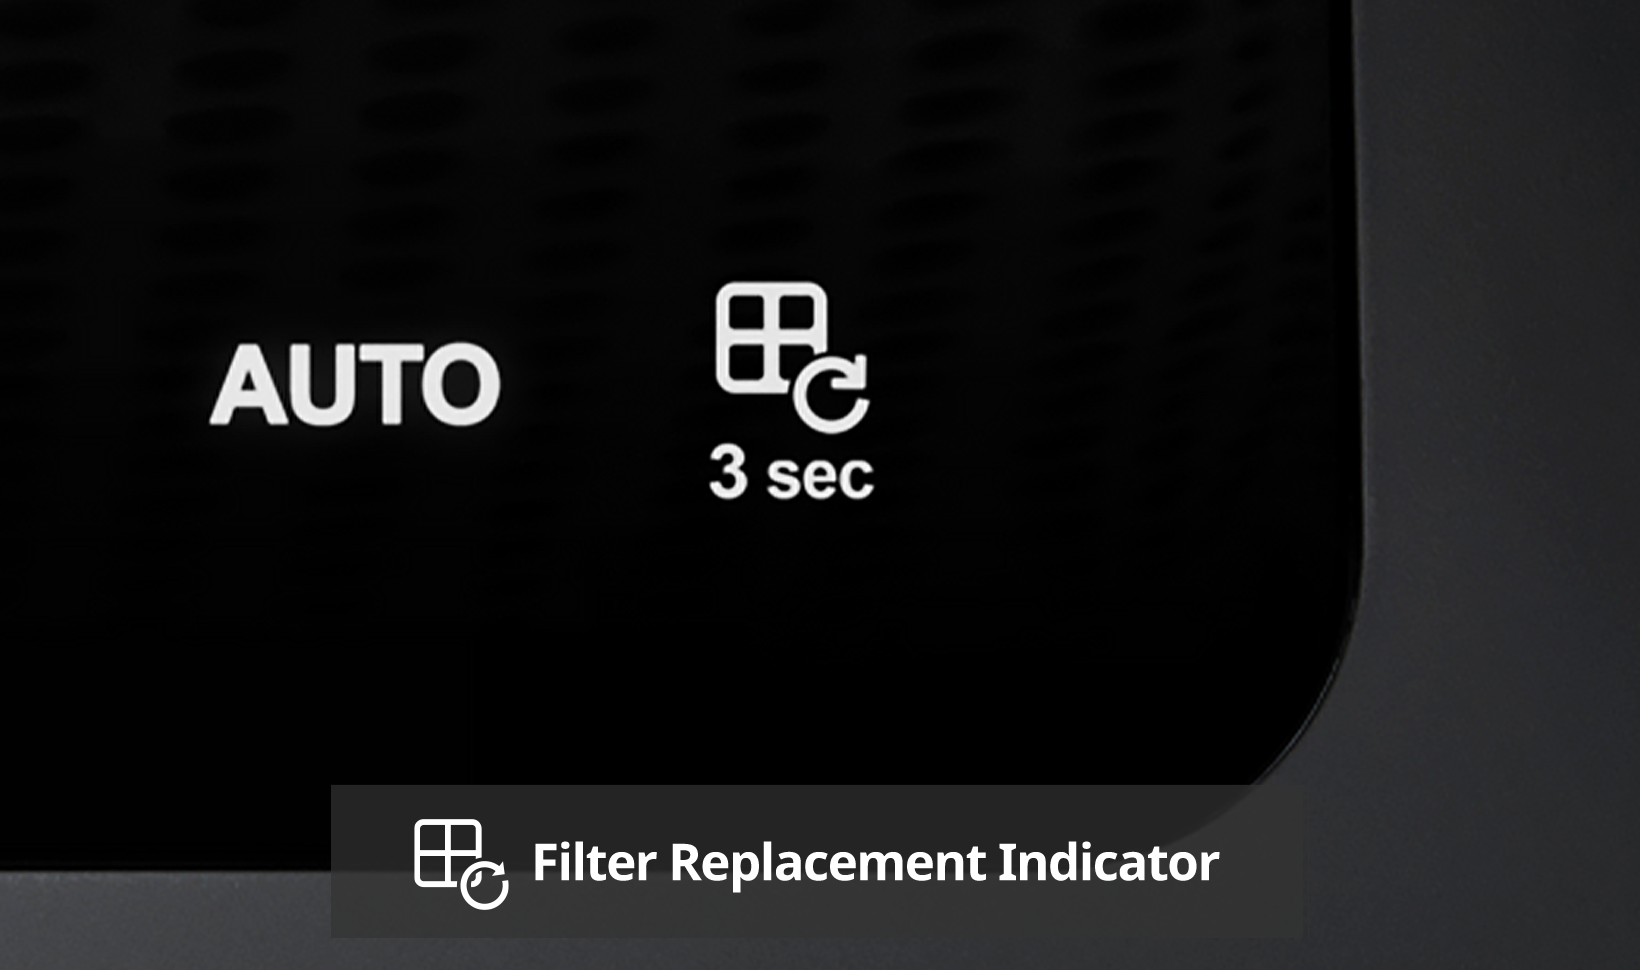 Airmega Aim auto mode and filter replacement indicator